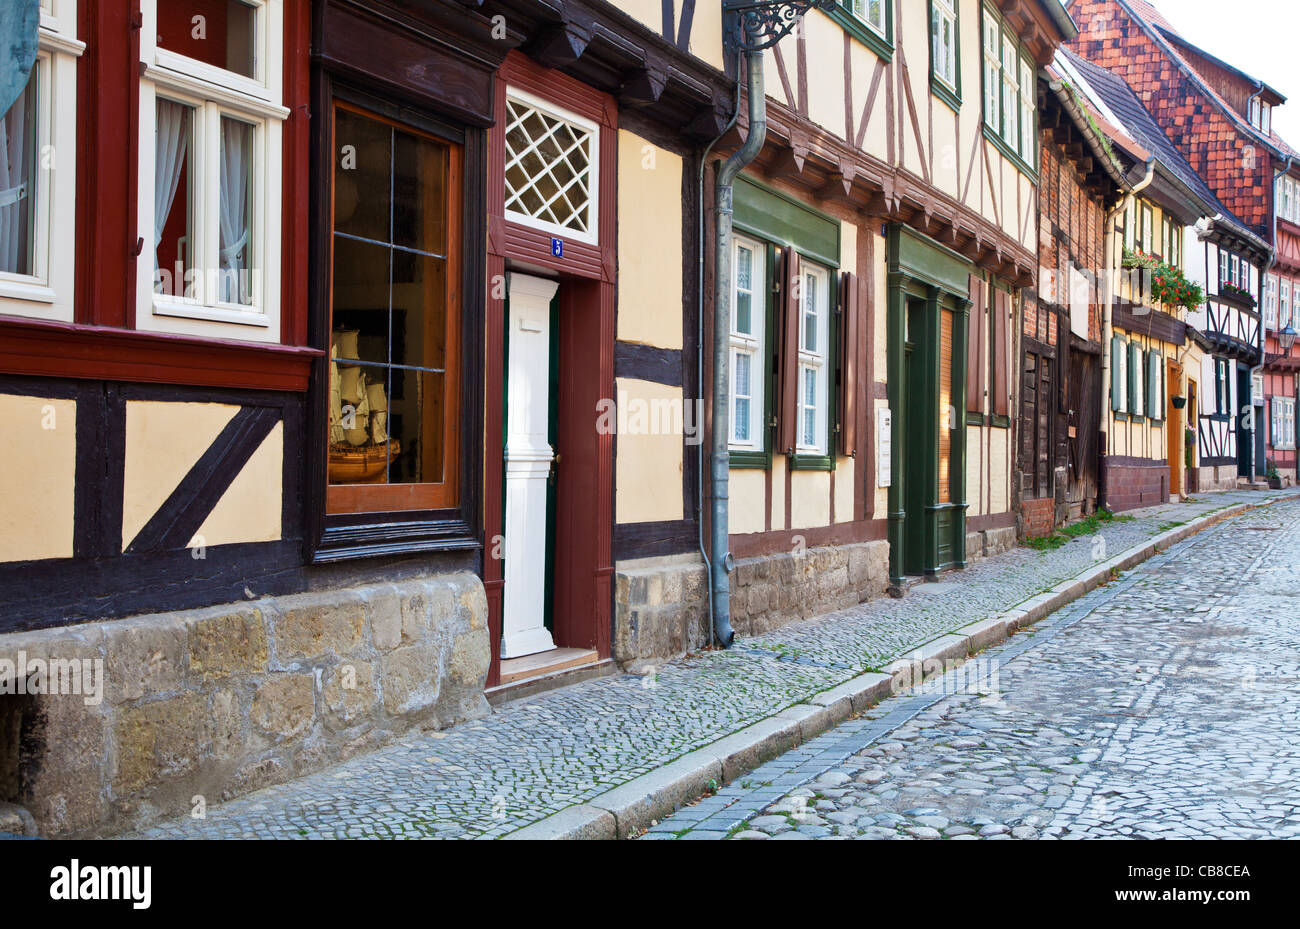 A row of half-timbered medieval houses in a cobbled street in the UNESCO World Heritage town of Quedlinburg, Germany. Stock Photo